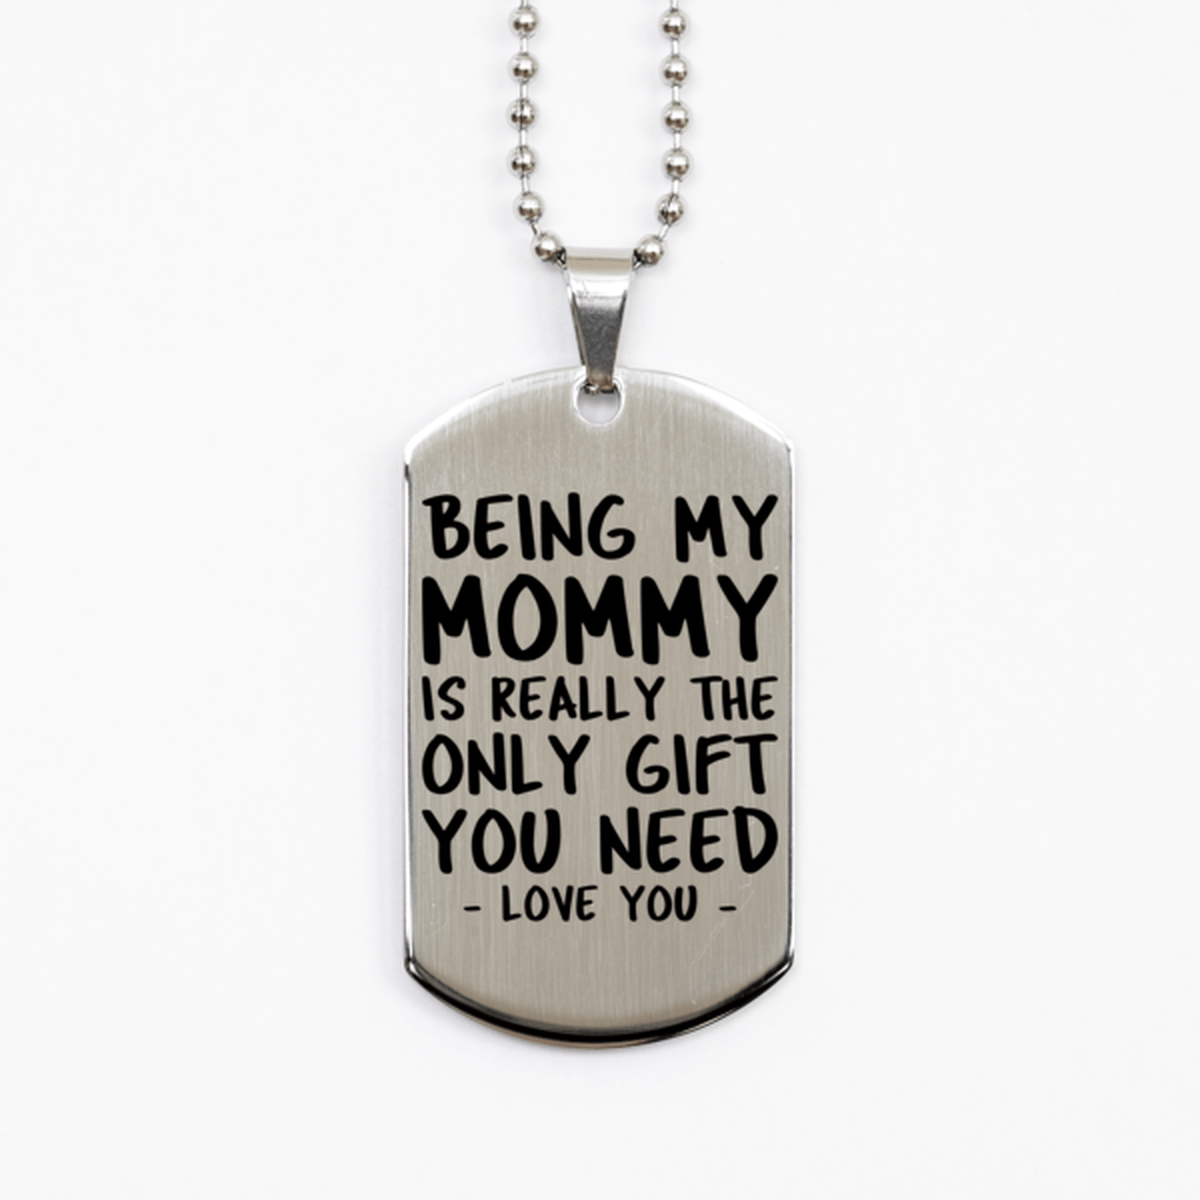 Funny Mommy Silver Dog Tag Necklace, Being My Mommy Is Really the Only Gift You Need, Best Birthday Gifts for Mommy